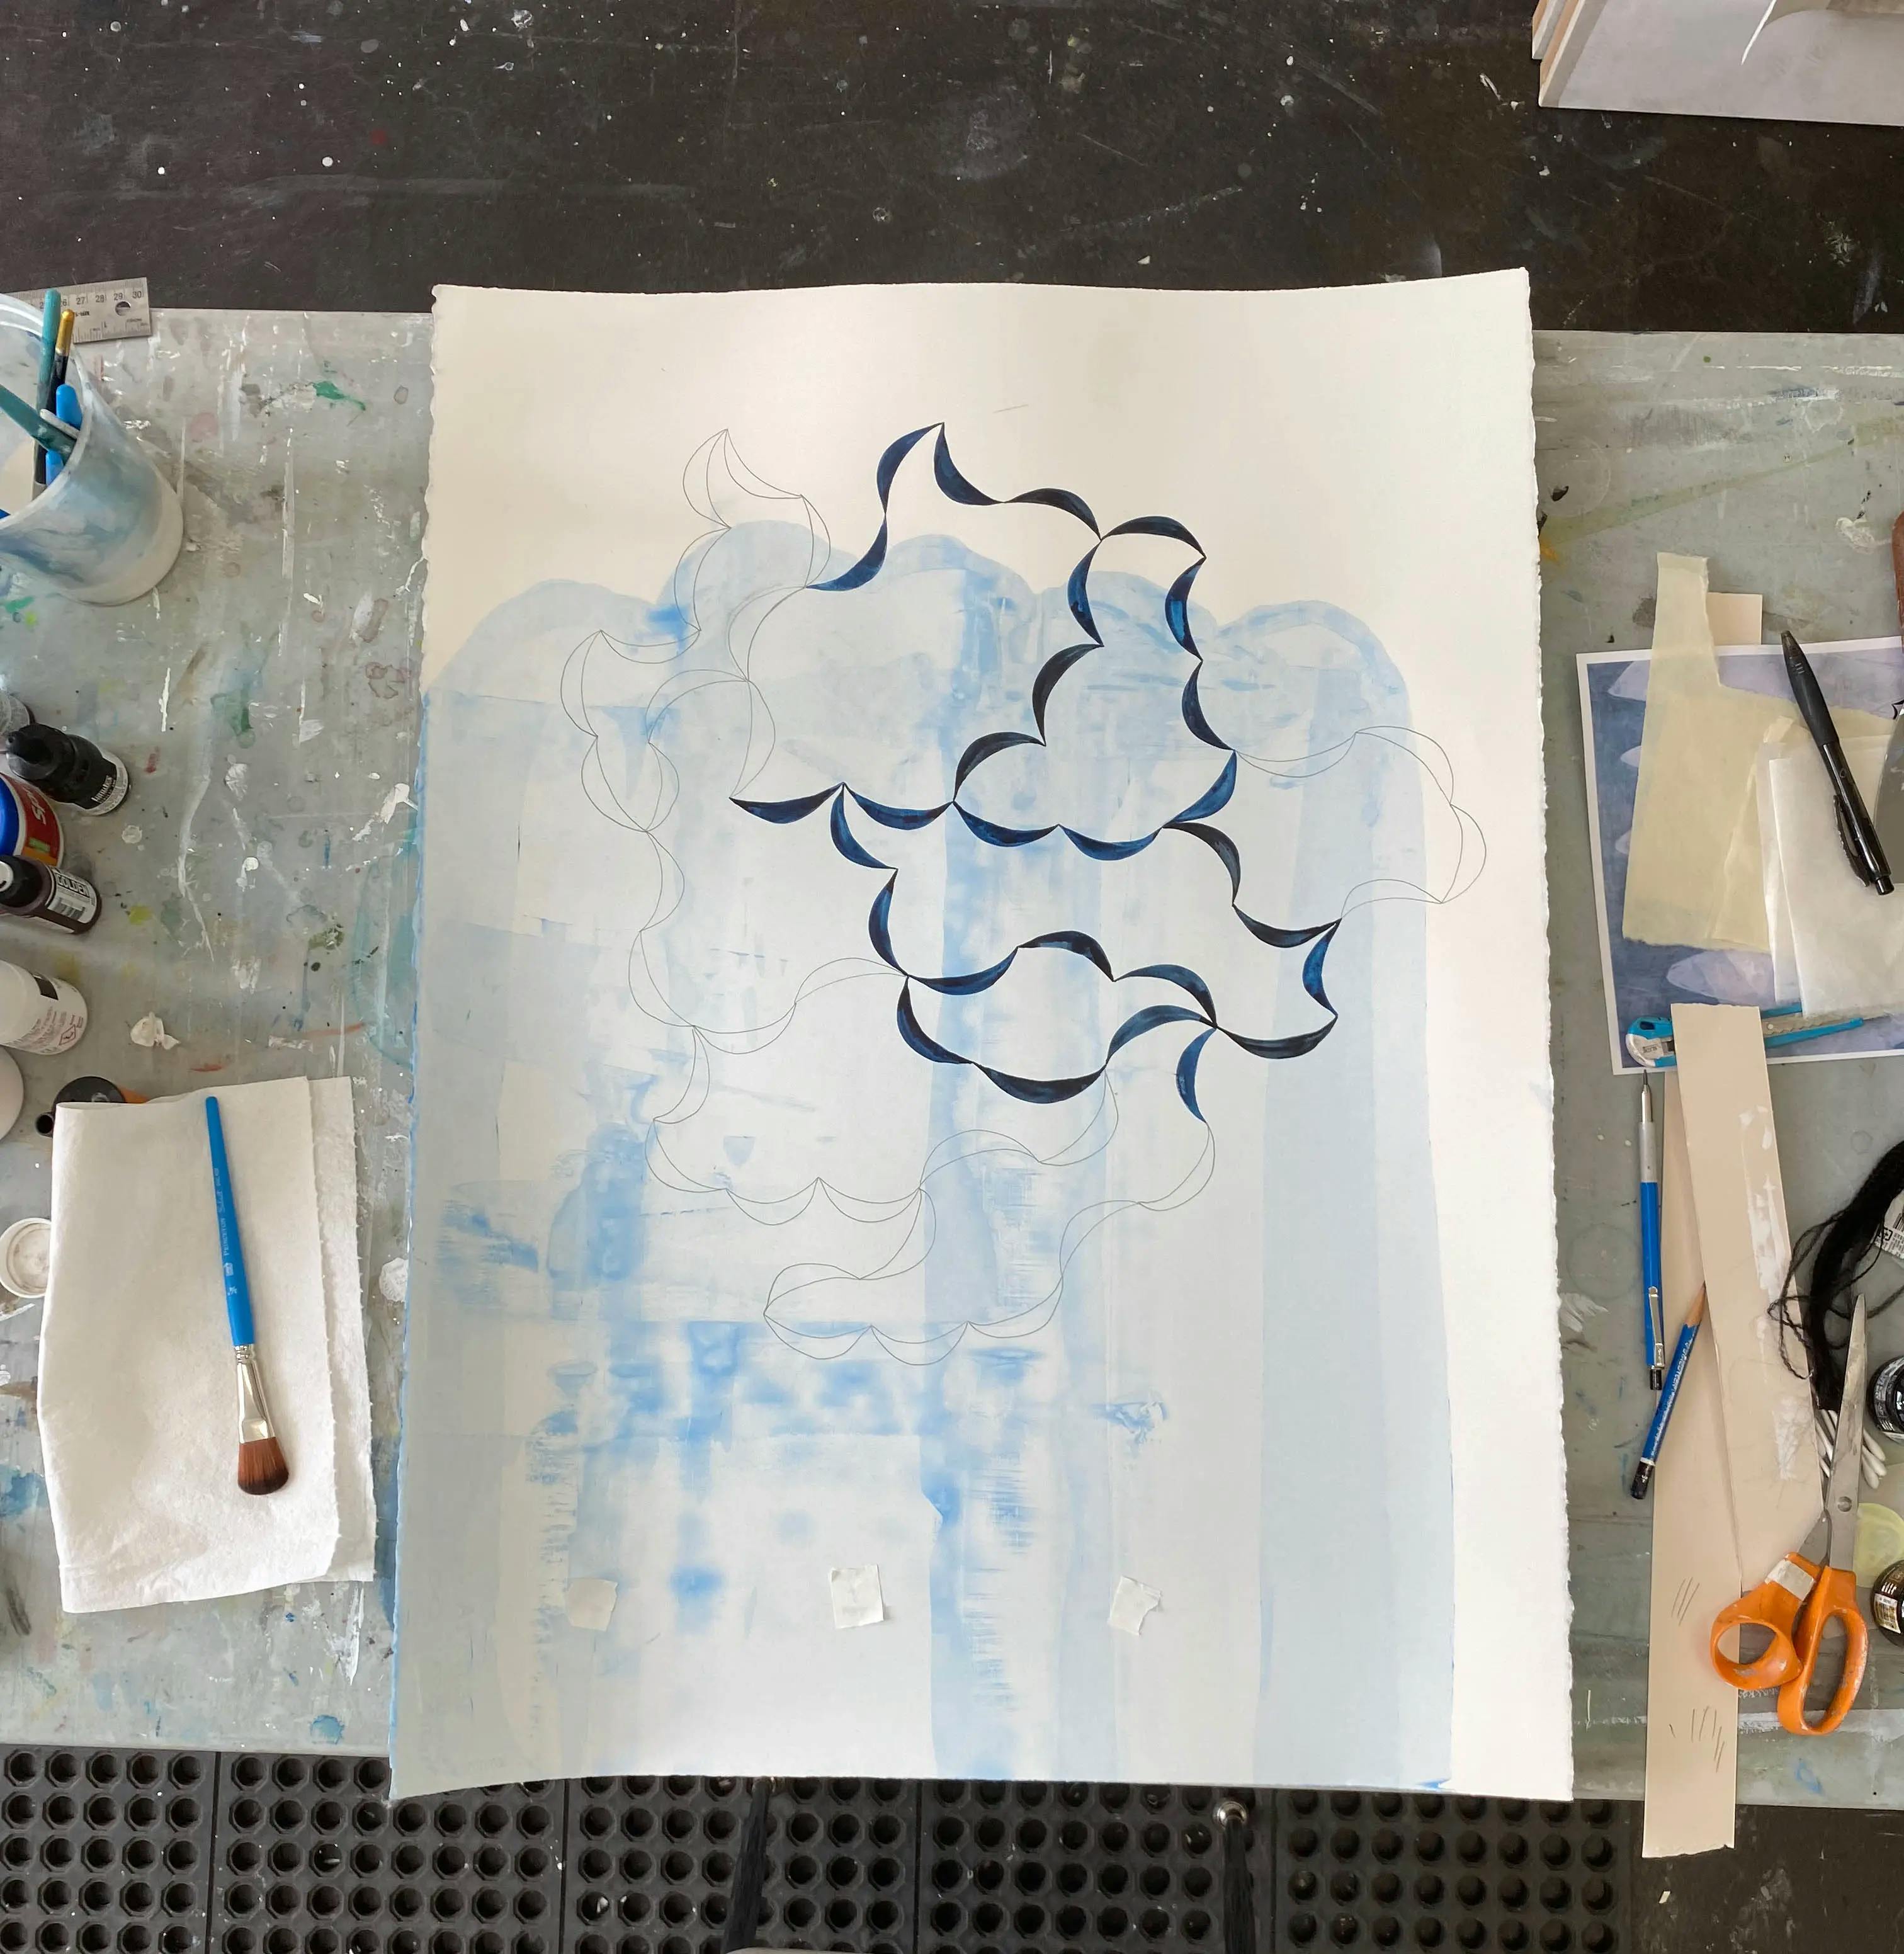 A blue, aqueous drawing by artist Lydia Bassis on a surface in her studio.